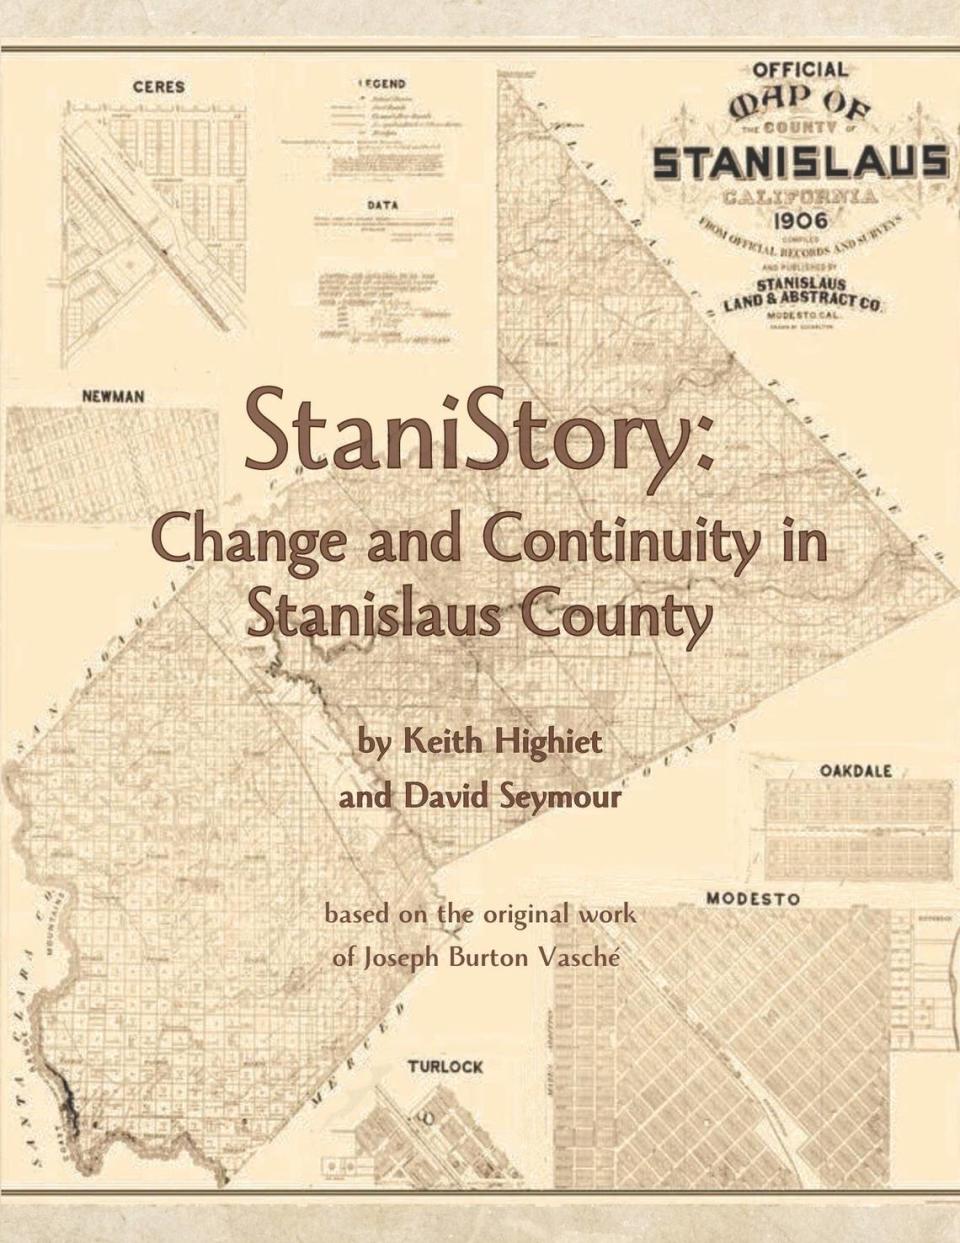 The cover of ‘StaniStory: Change and Continuity in Stanislaus County’